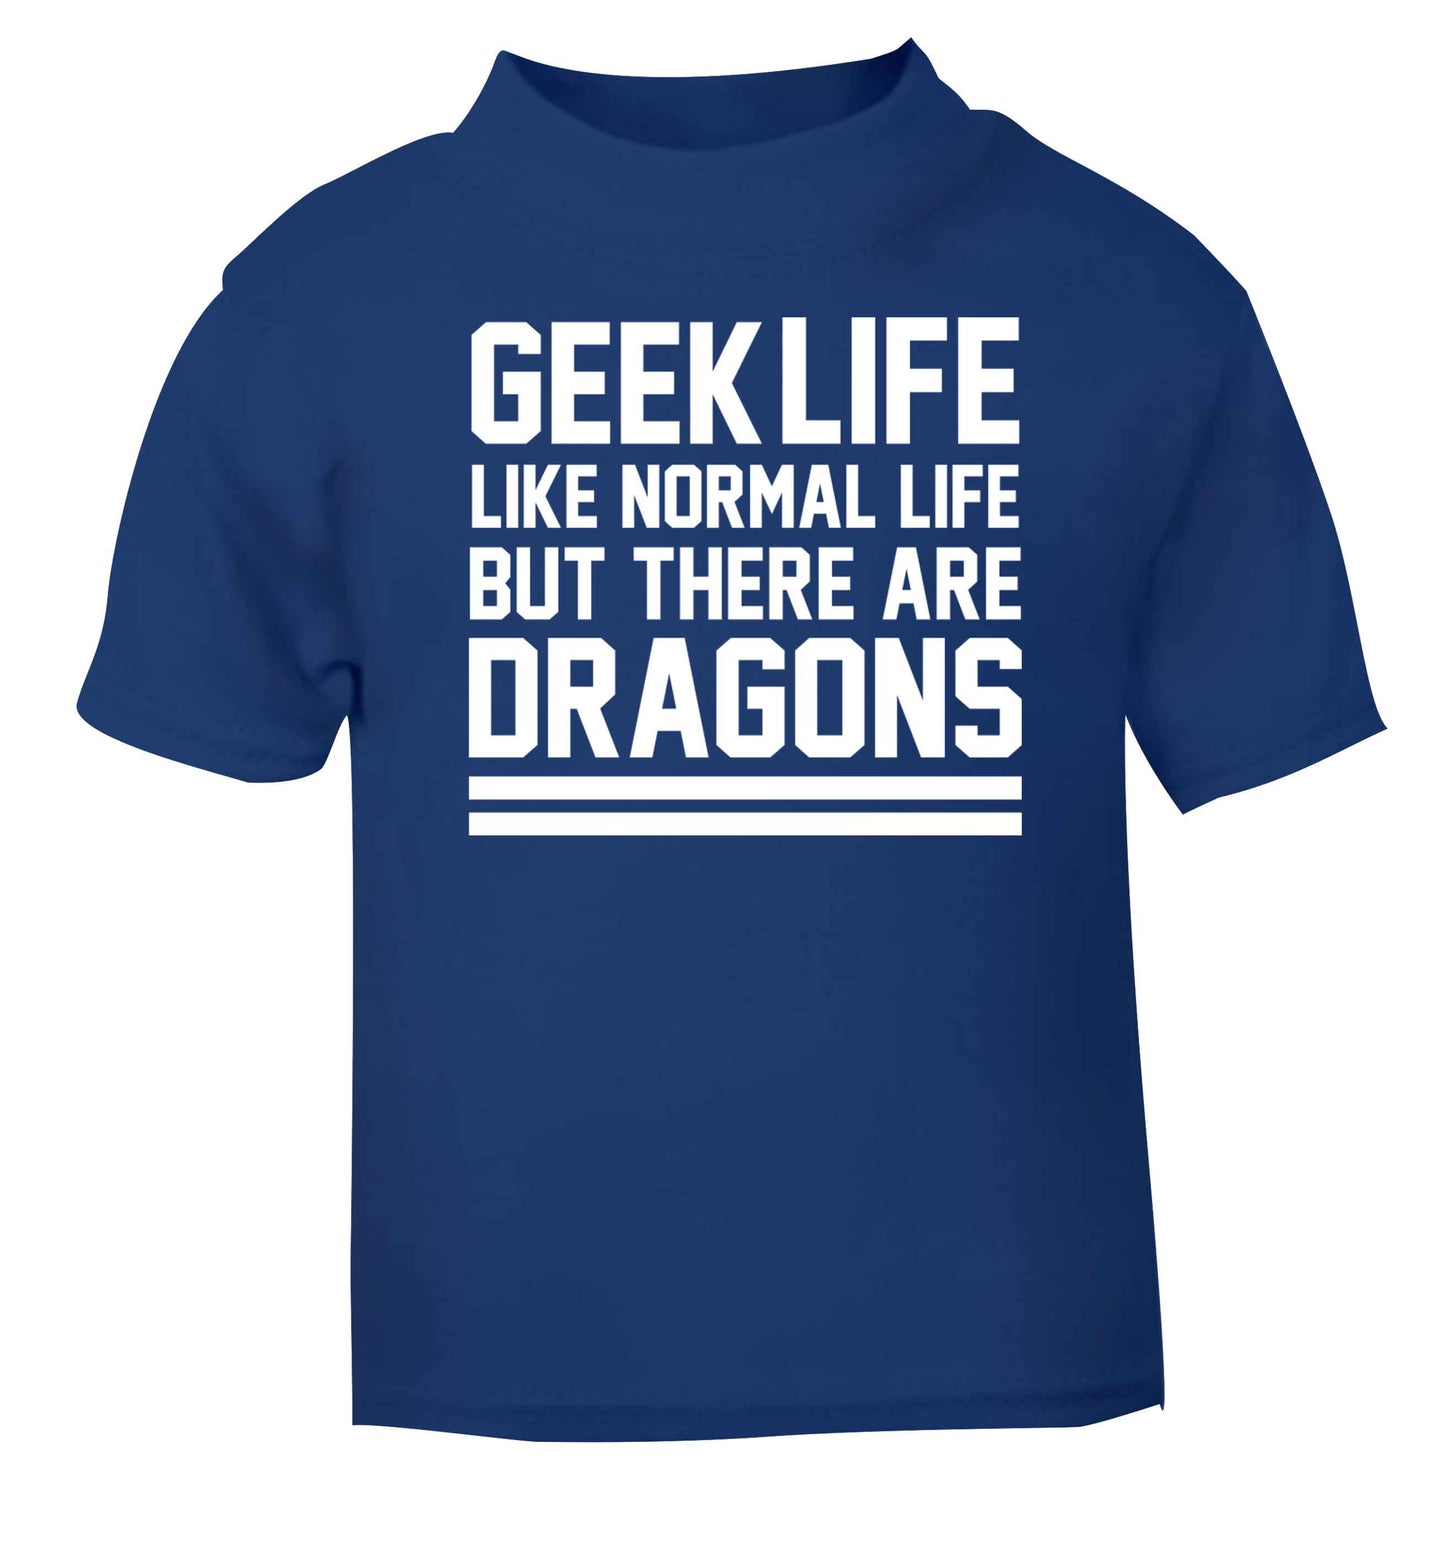 Geek life like normal life but there are dragons blue baby toddler Tshirt 2 Years